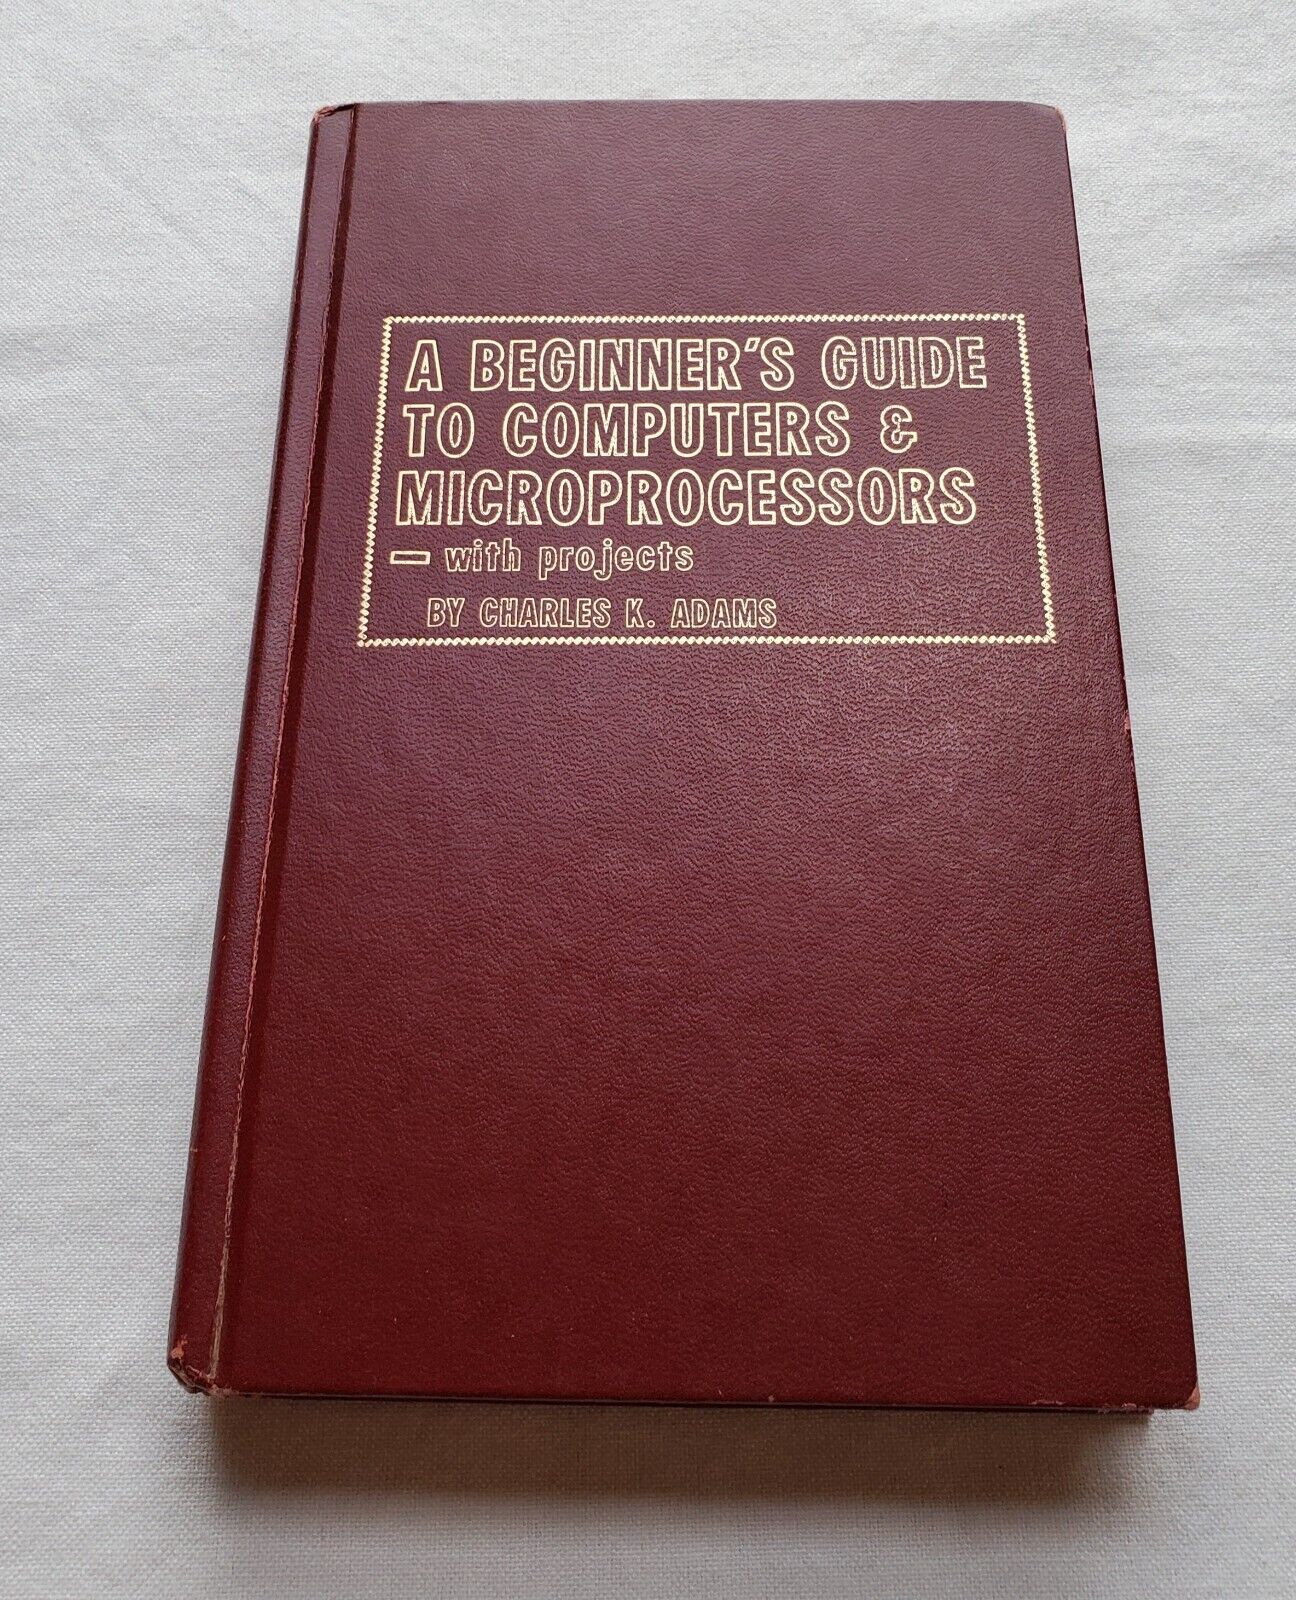 A Beginners Guide To Computers & Microprocessors 1st Edition & Printing 1978